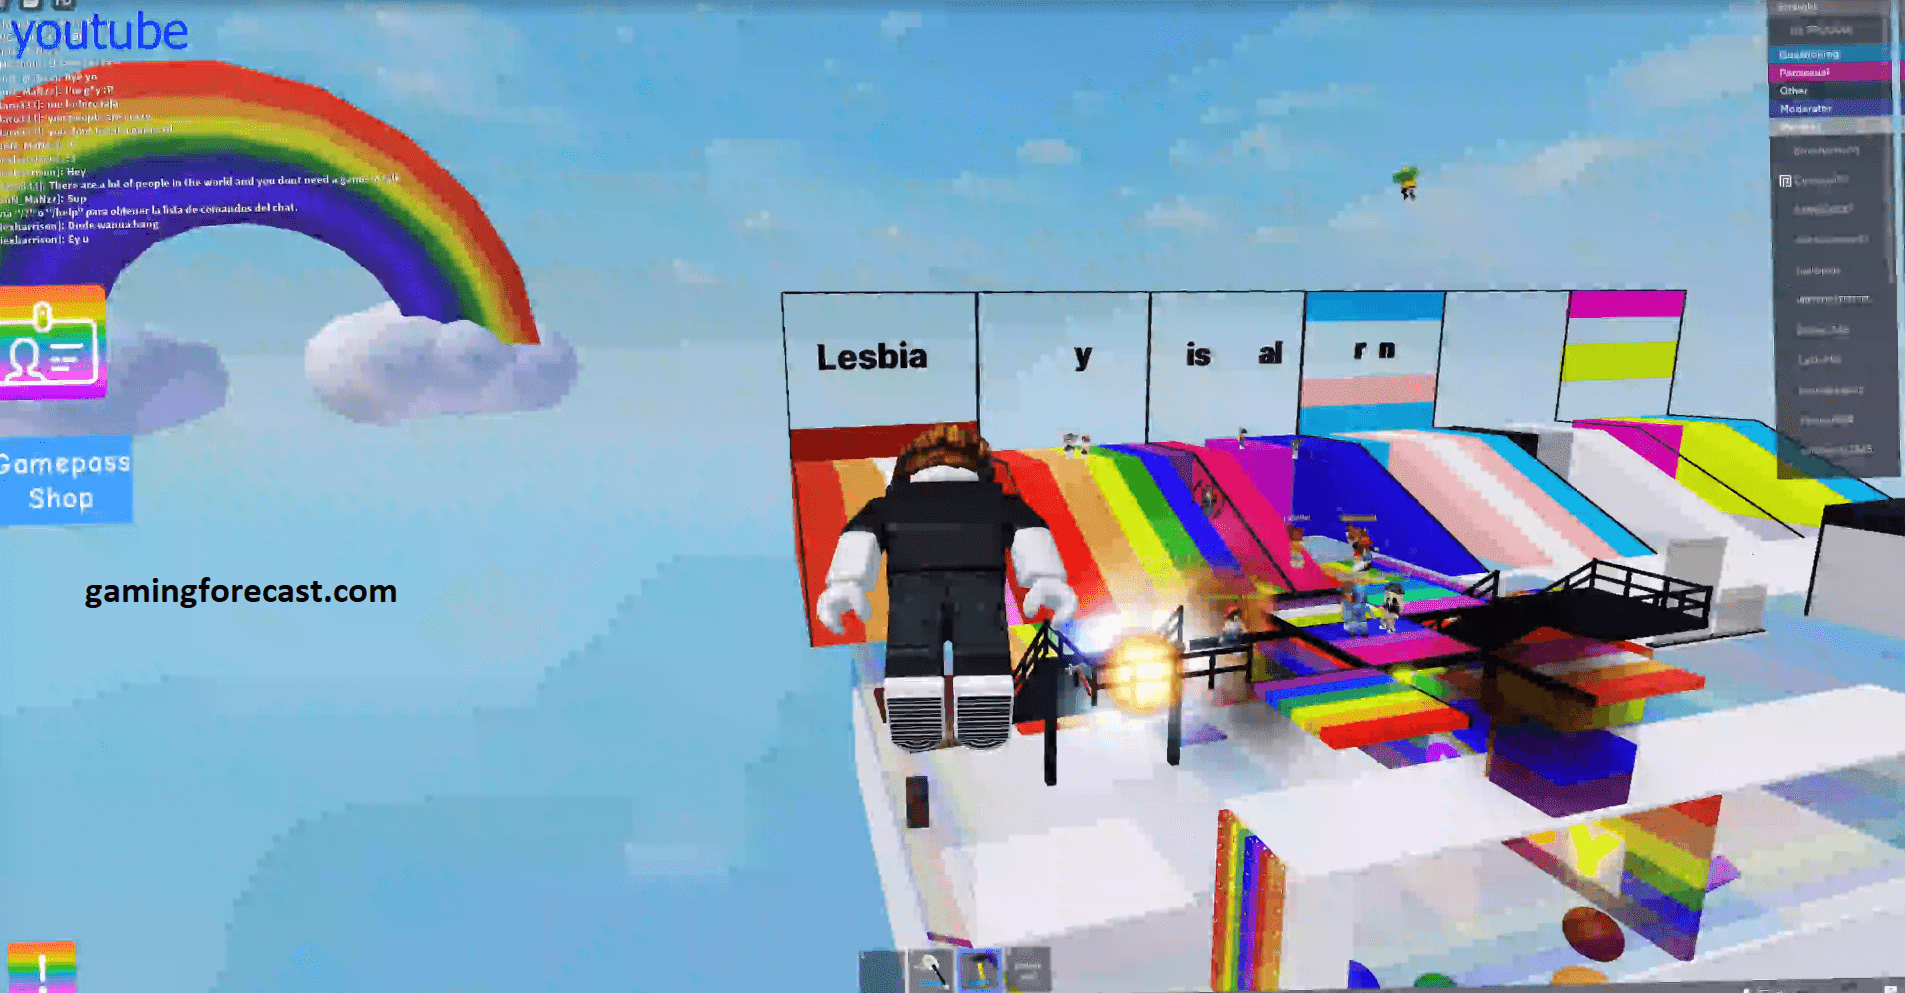 Roblox Hack Download Pc Destroy Lobby Fly Aimbot Scripts 2021 Gaming Forecast Download Free Online Game Hacks - download exploit for roblox